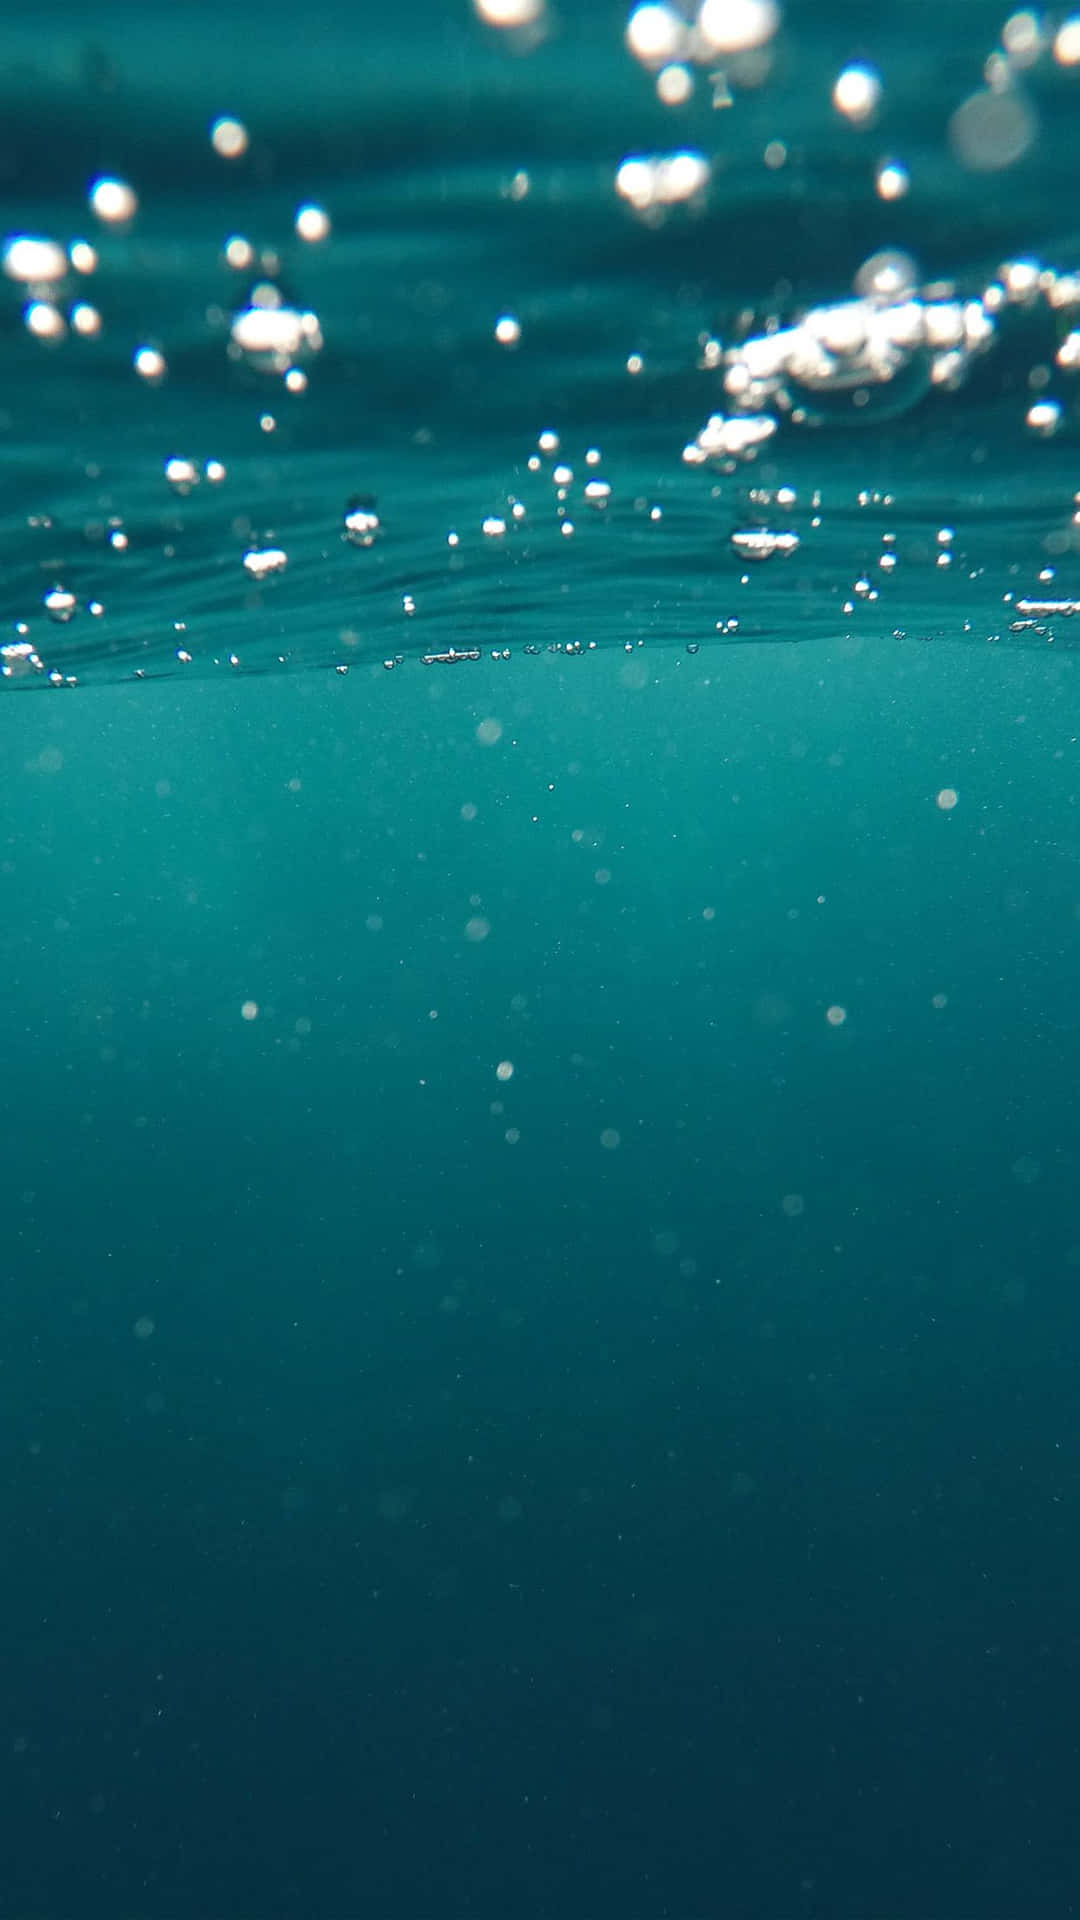 Enjoy the Beauty of Underwater with your iPhone Wallpaper